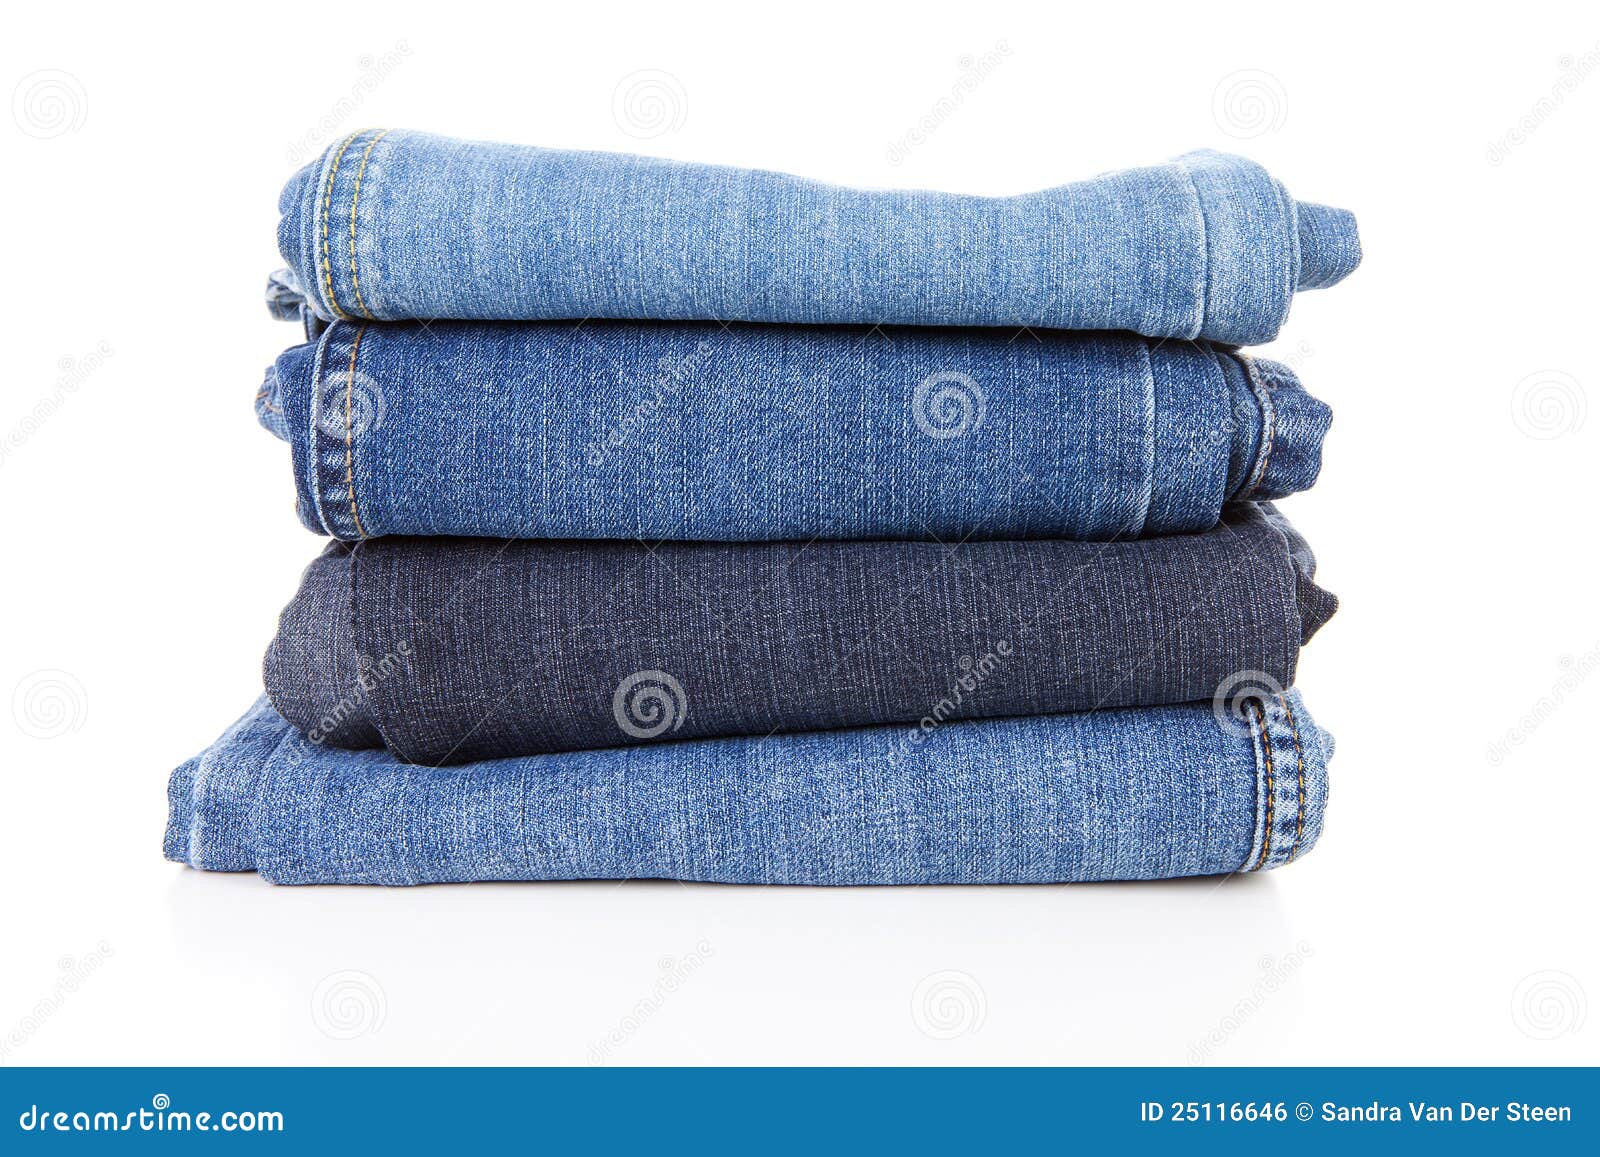 Pile of blue jeans stock photo. Image of textile, trousers - 25116646